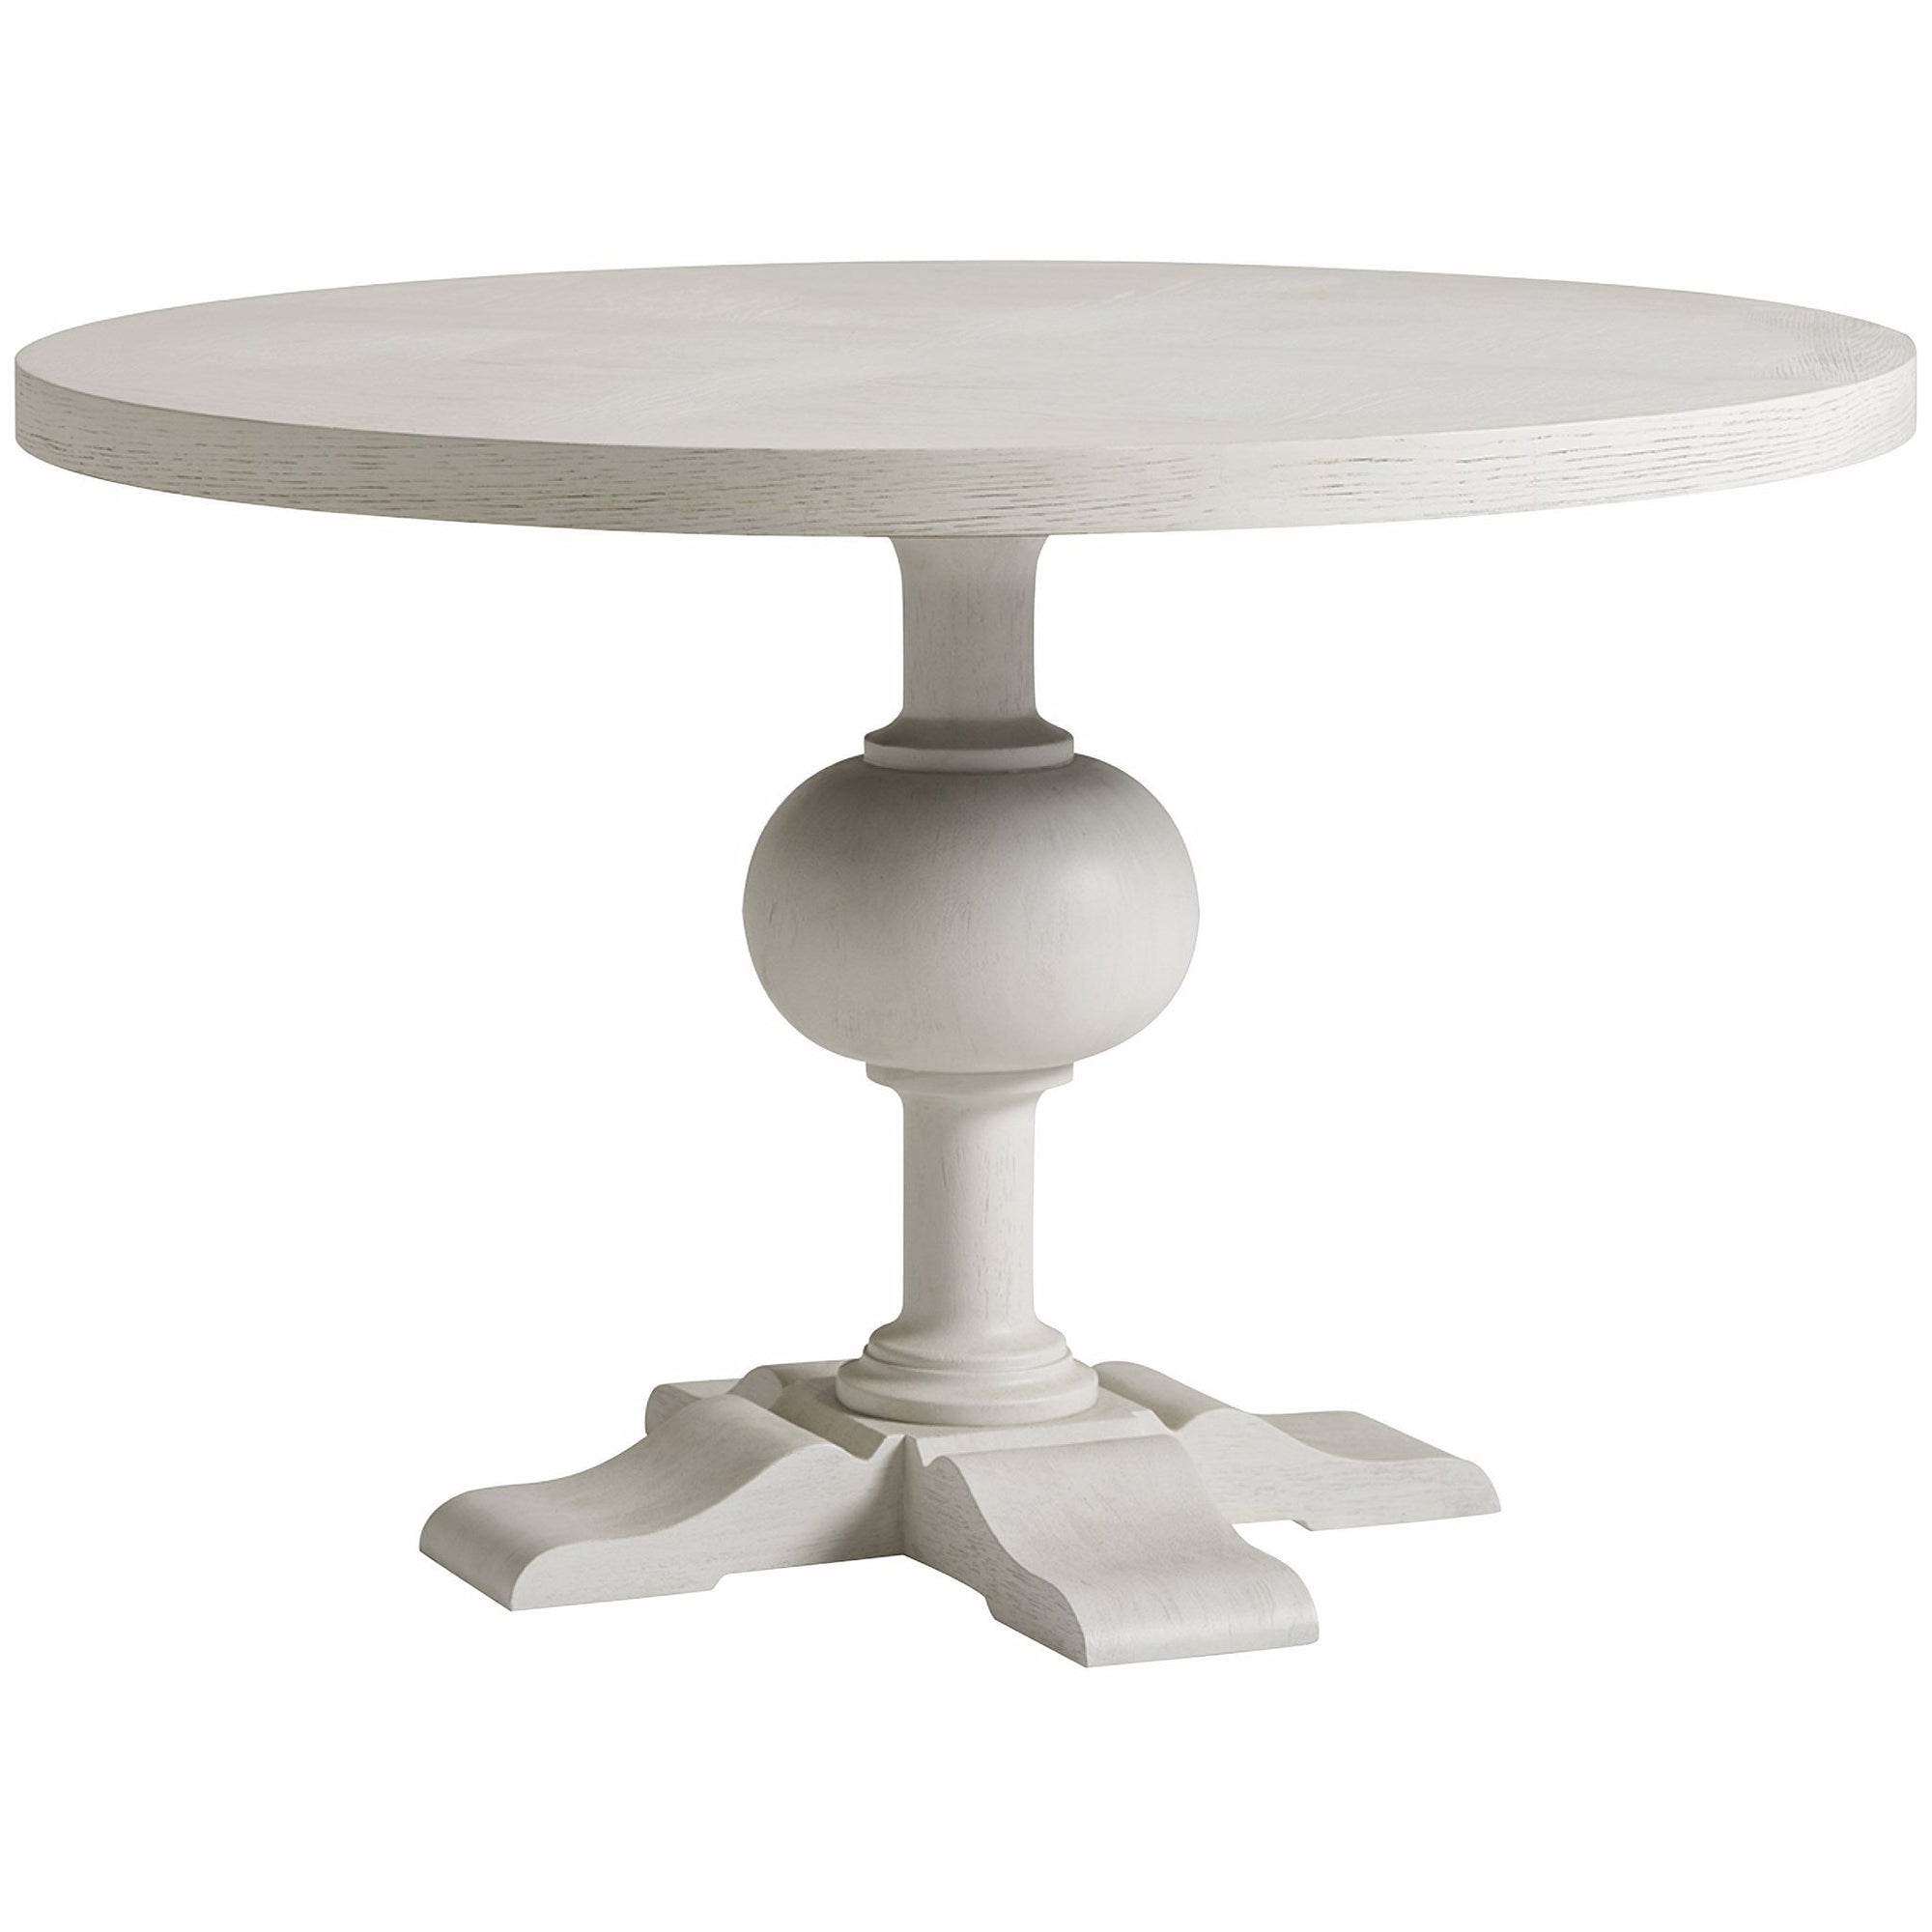 Round Dining Table 46"